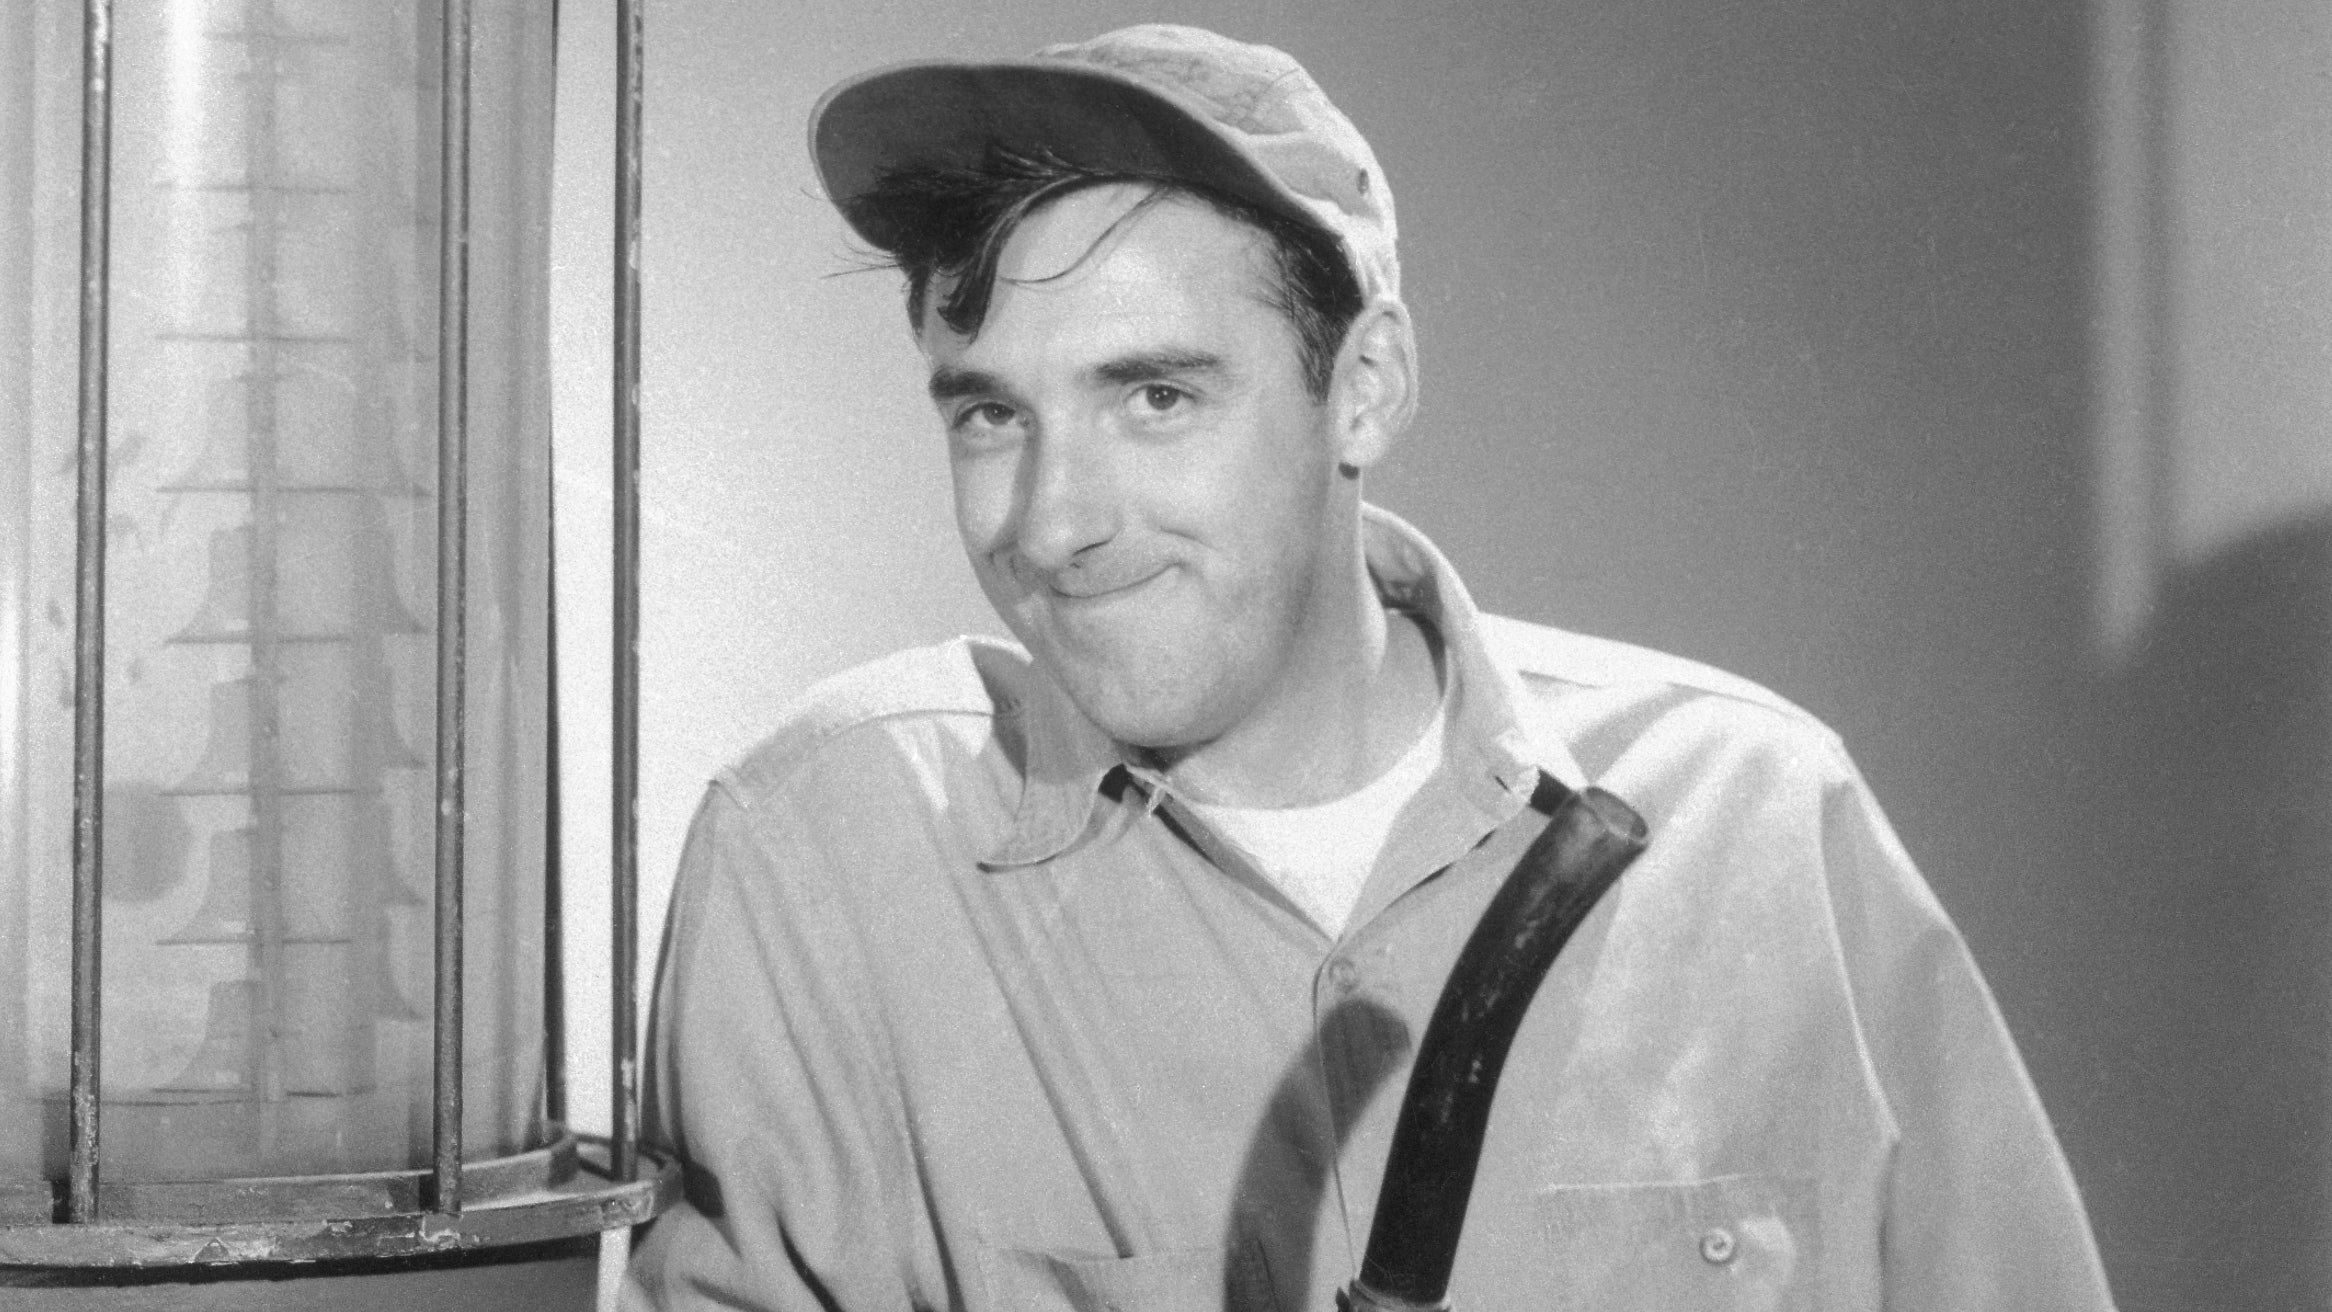 Jim Nabors, the actor best known for playing the character Gomer Pyle on &a...